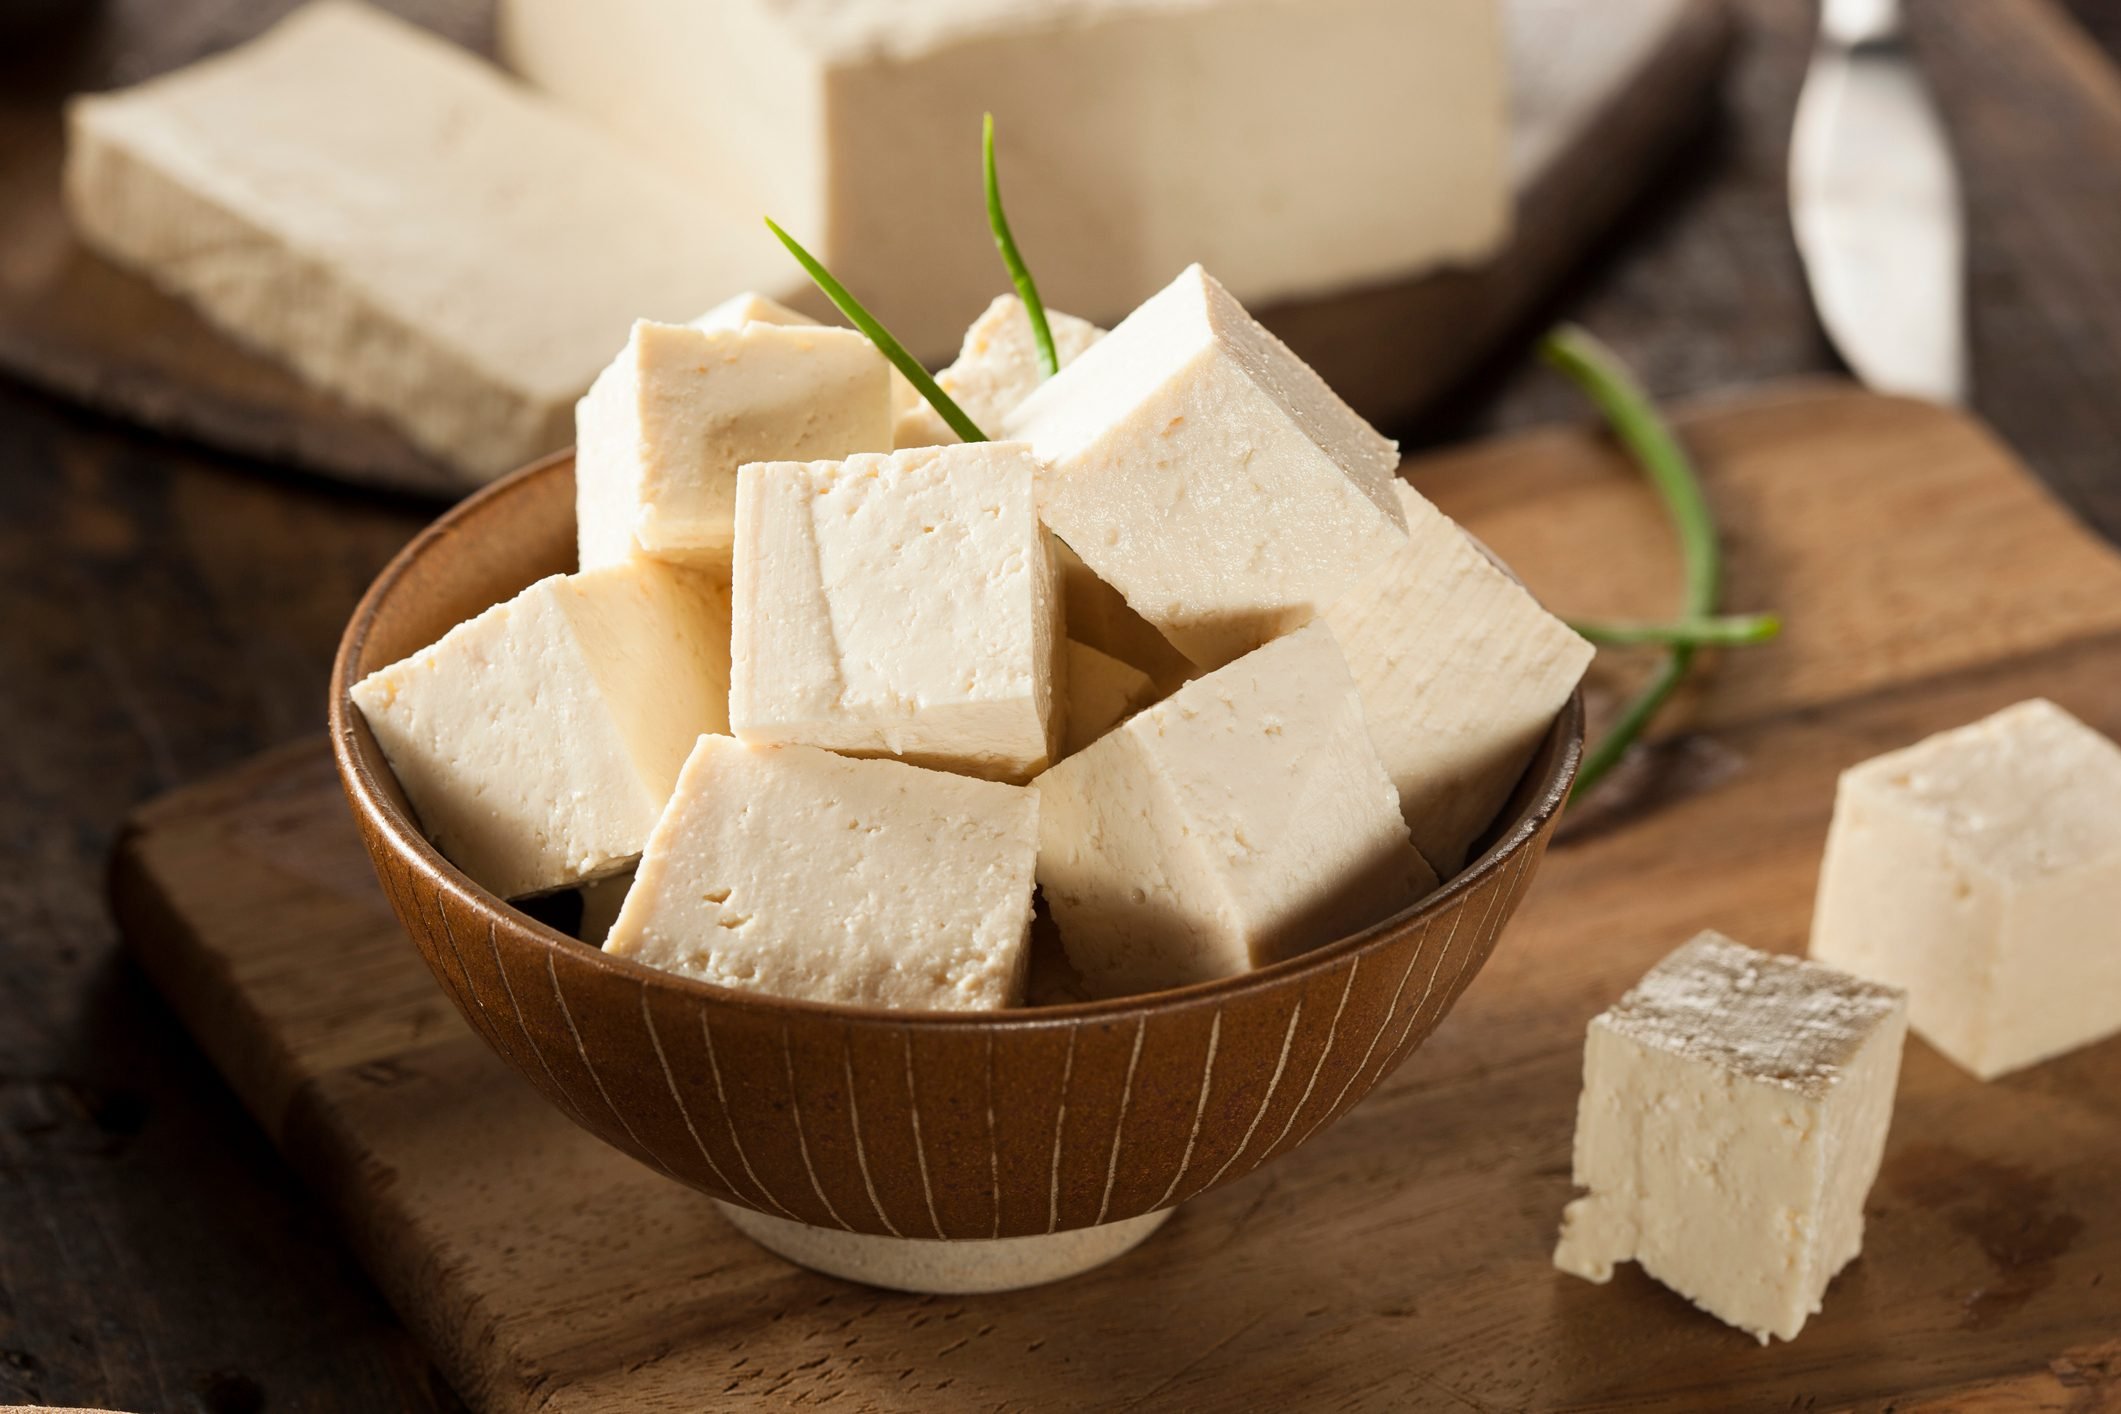 What to Know About Tofu's Nutrition, Calories, and Protein